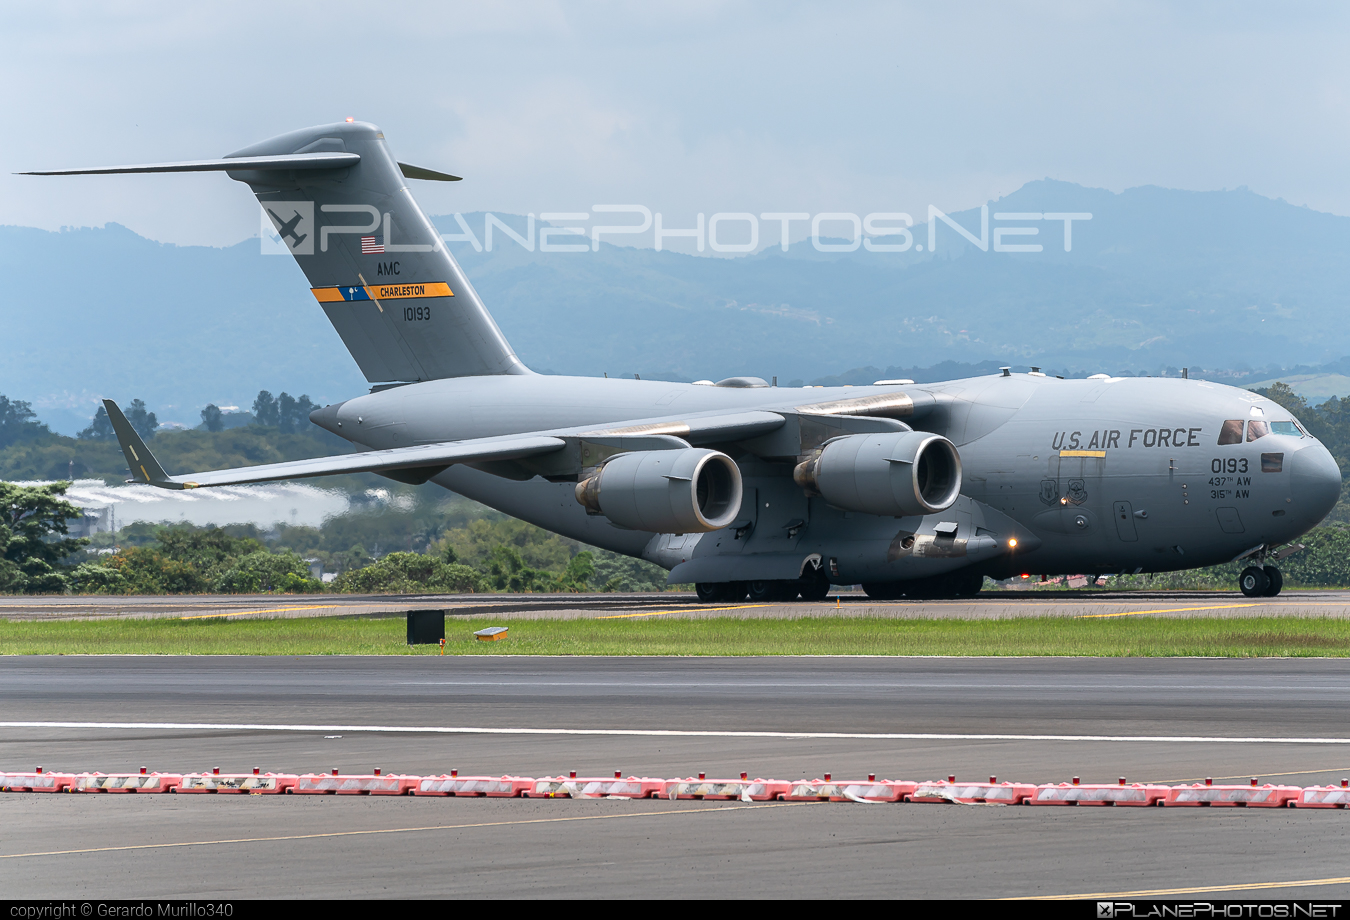 Boeing C-17A Globemaster III - 01-0193 operated by US Air Force (USAF) #boeing #c17 #c17globemaster #globemaster #globemasteriii #usaf #usairforce